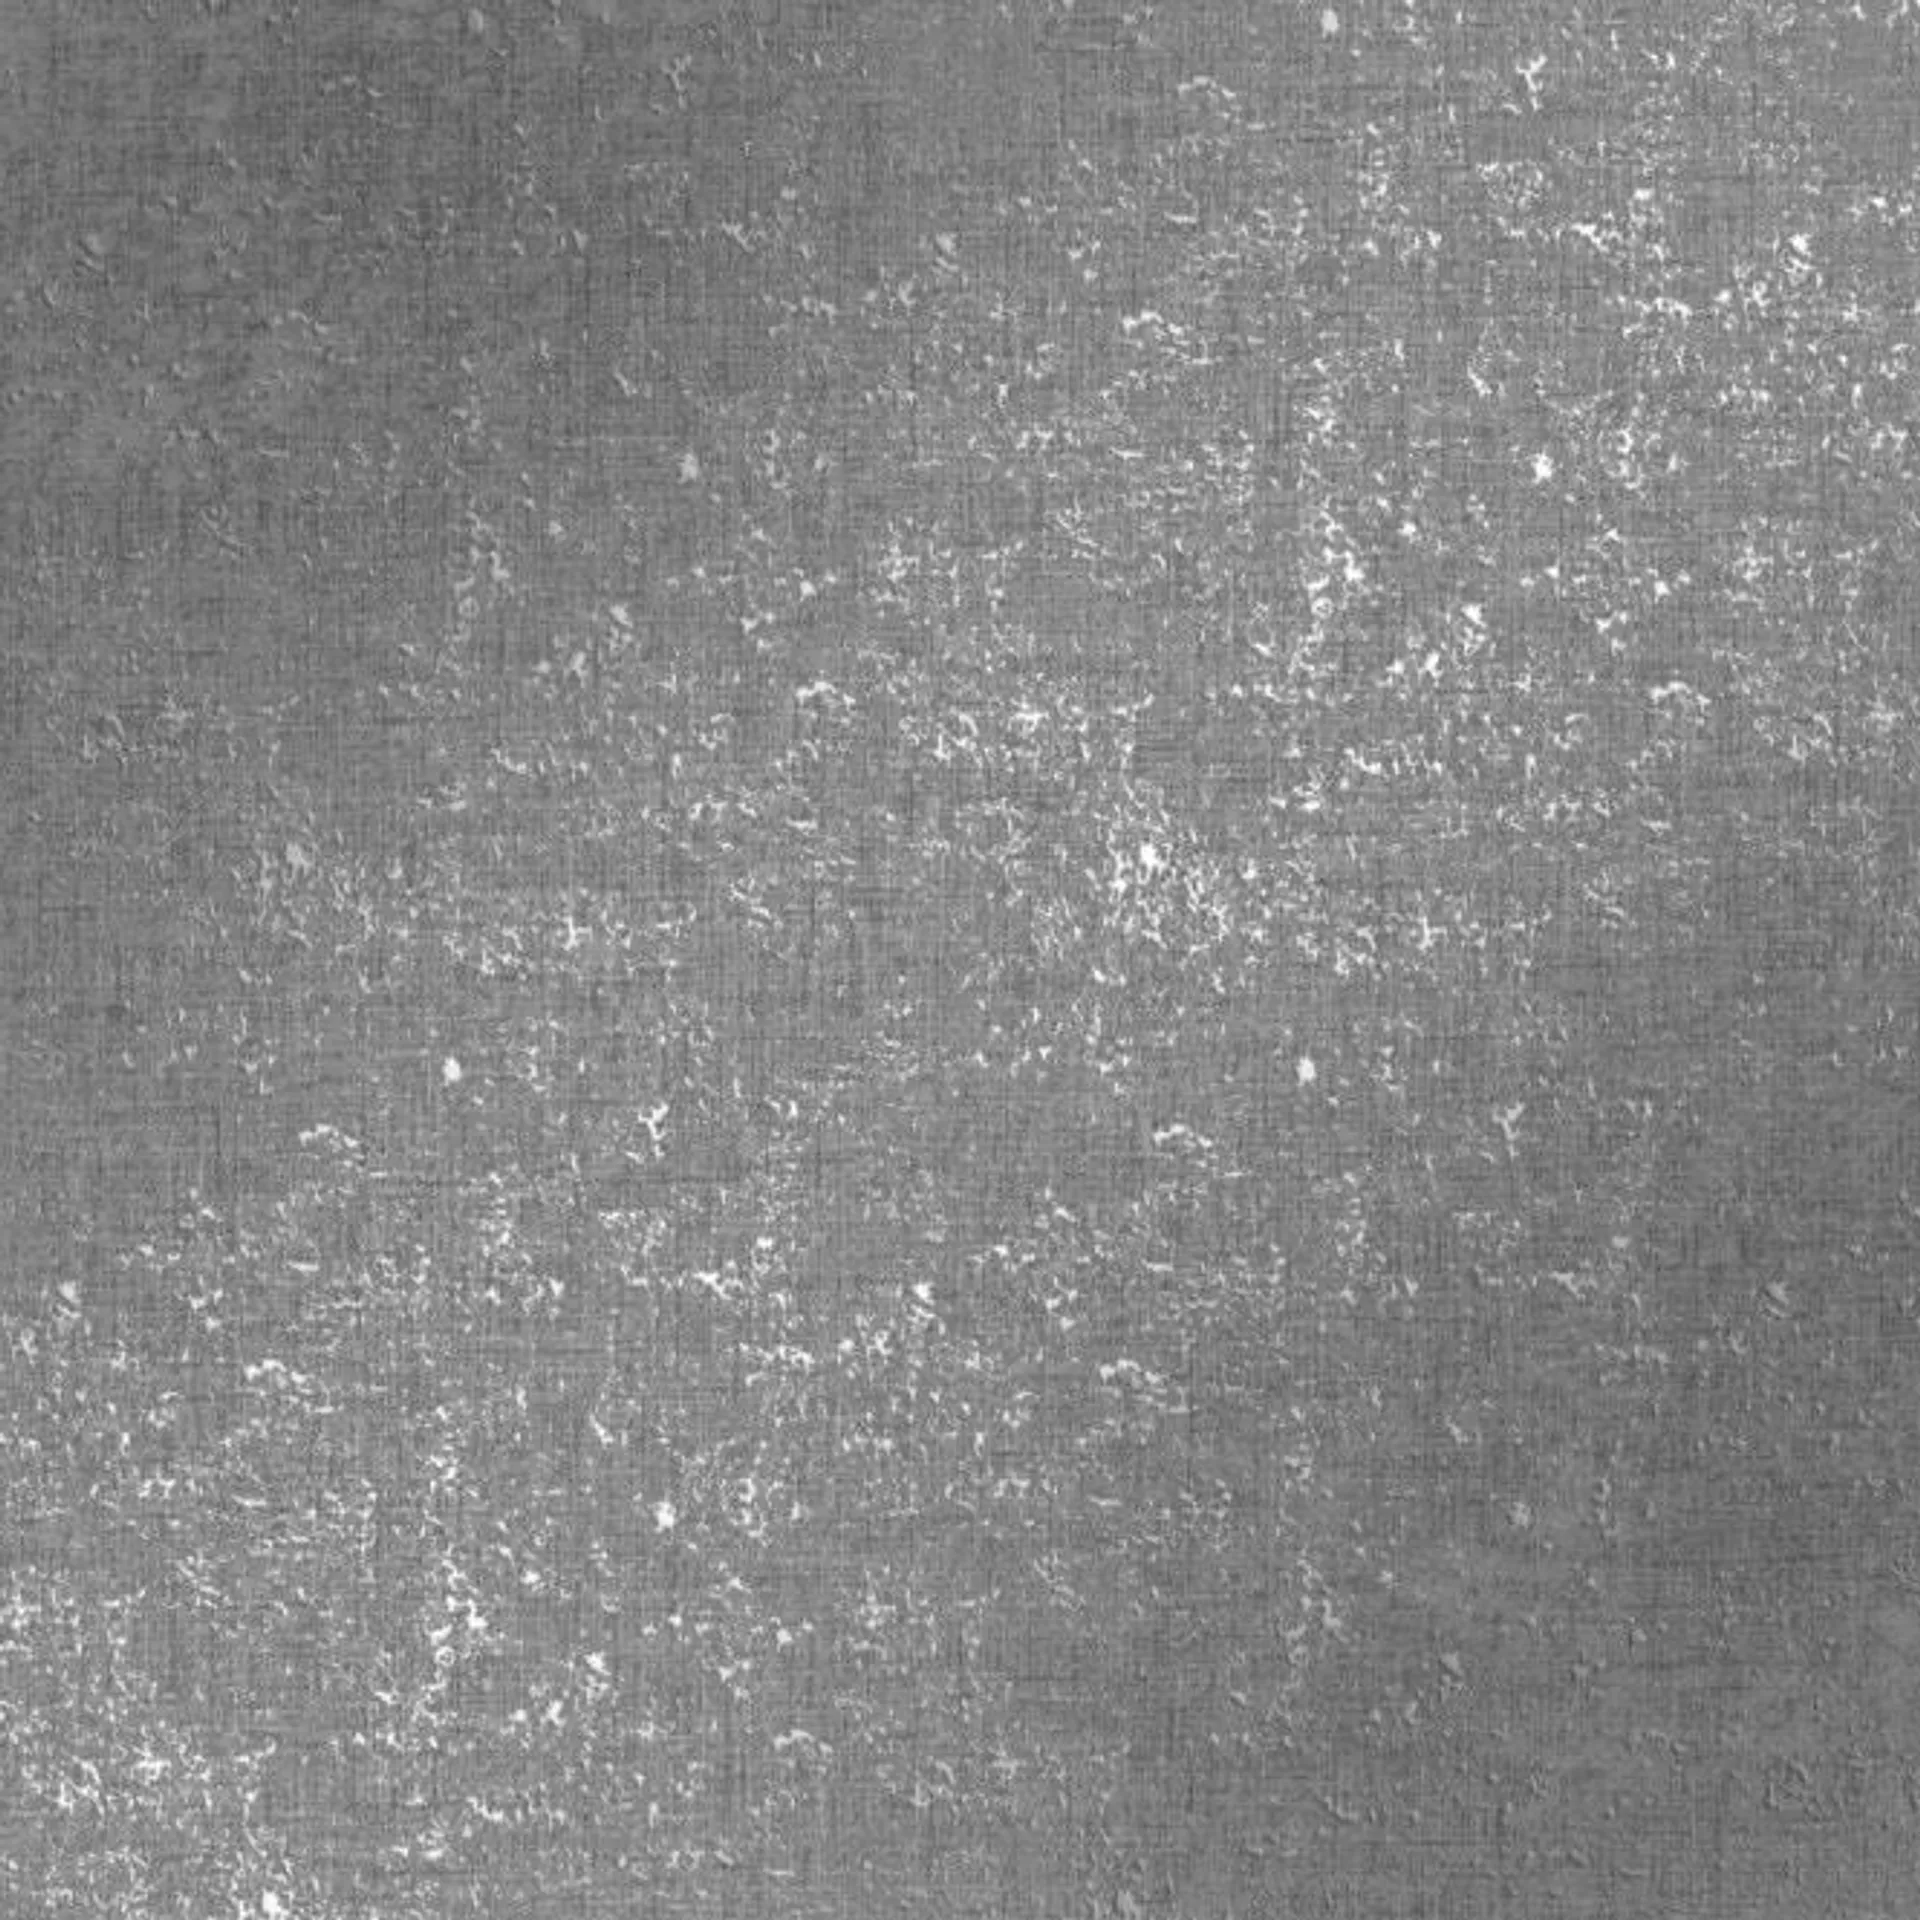 Sapphire Foil Texture wallpaper in charcoal